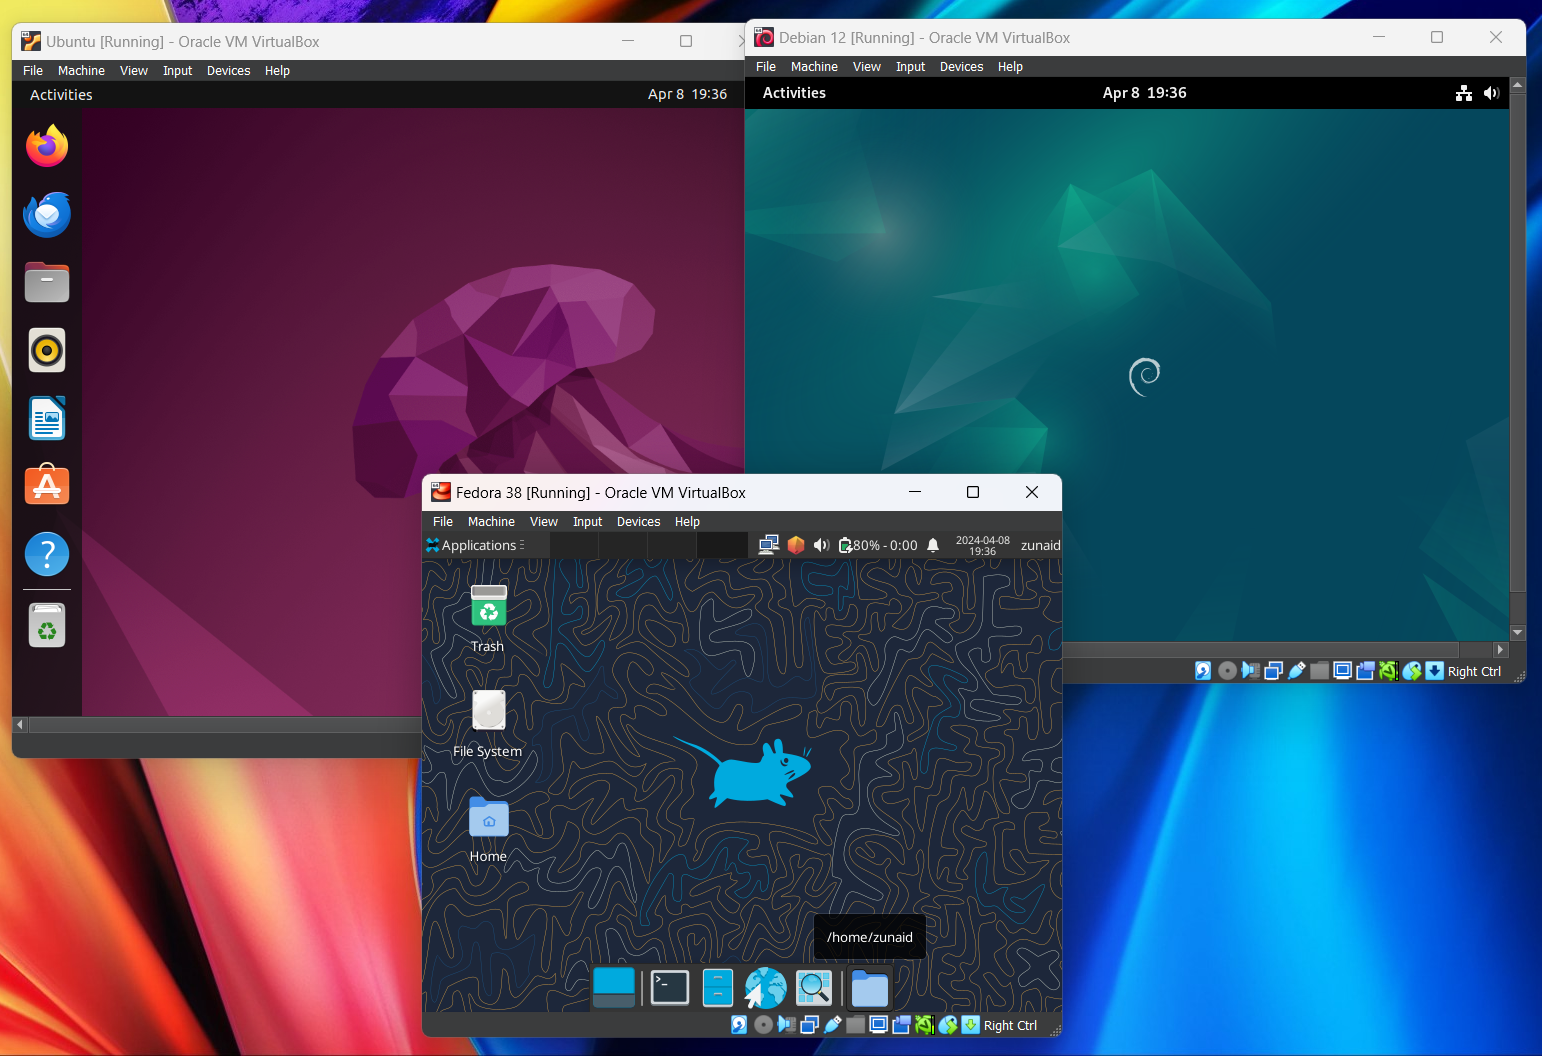 An example of Ubuntu, Debian, and Fedora Linux distributions running on the same device using VirtualBox